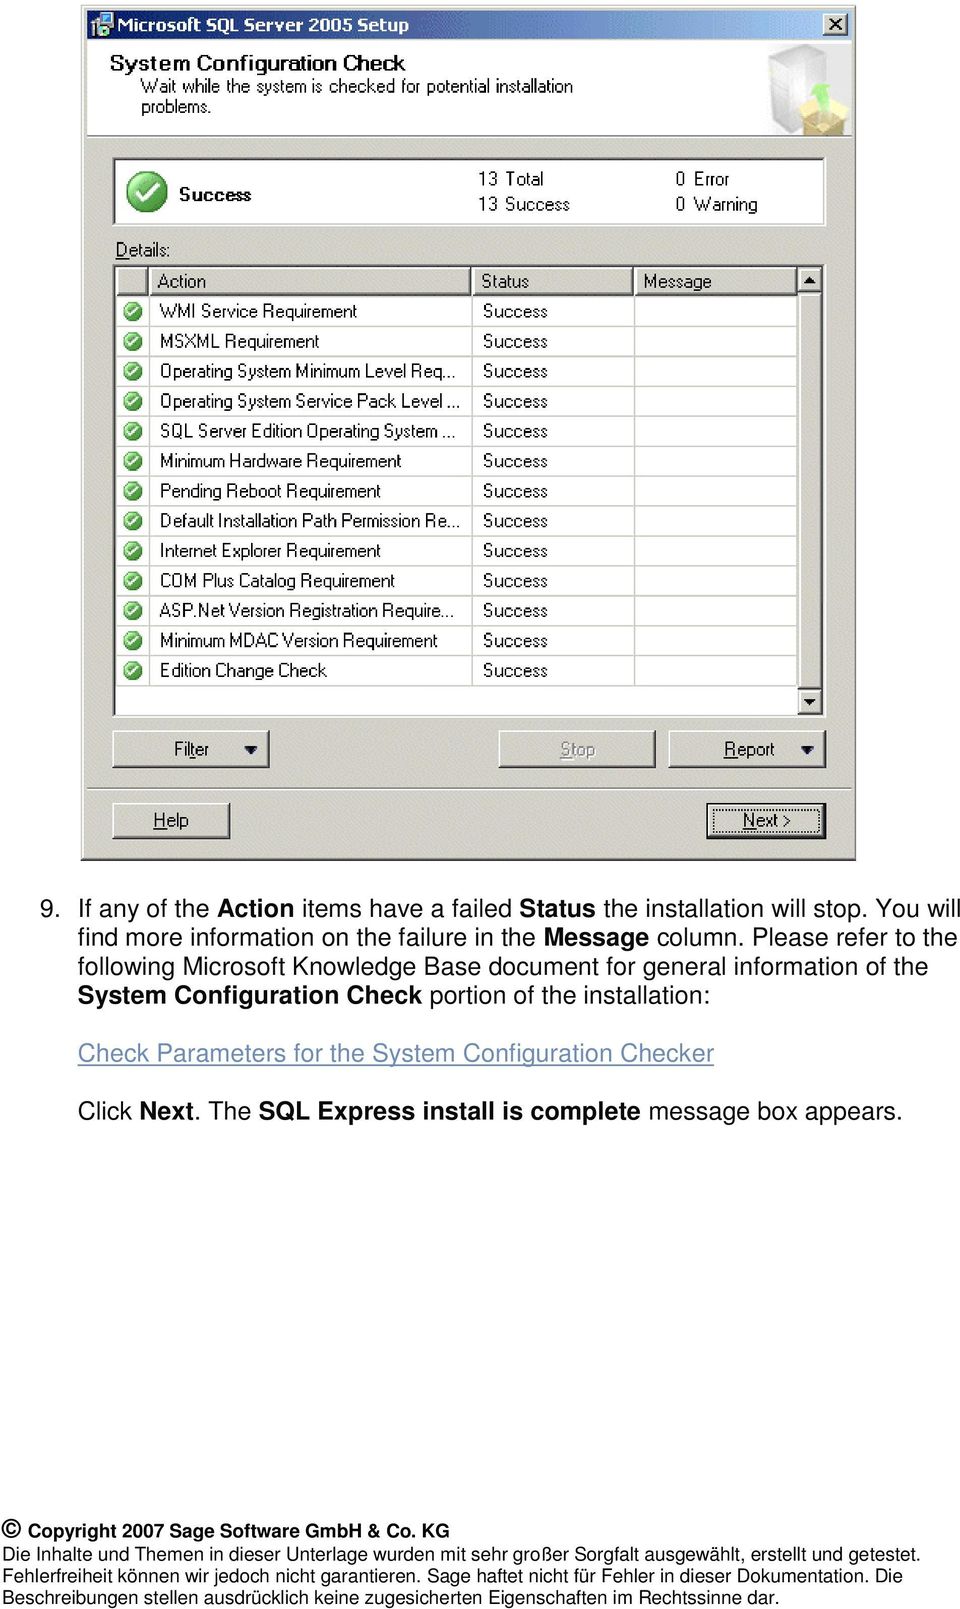 Please refer to the following Microsoft Knowledge Base document for general information of the System